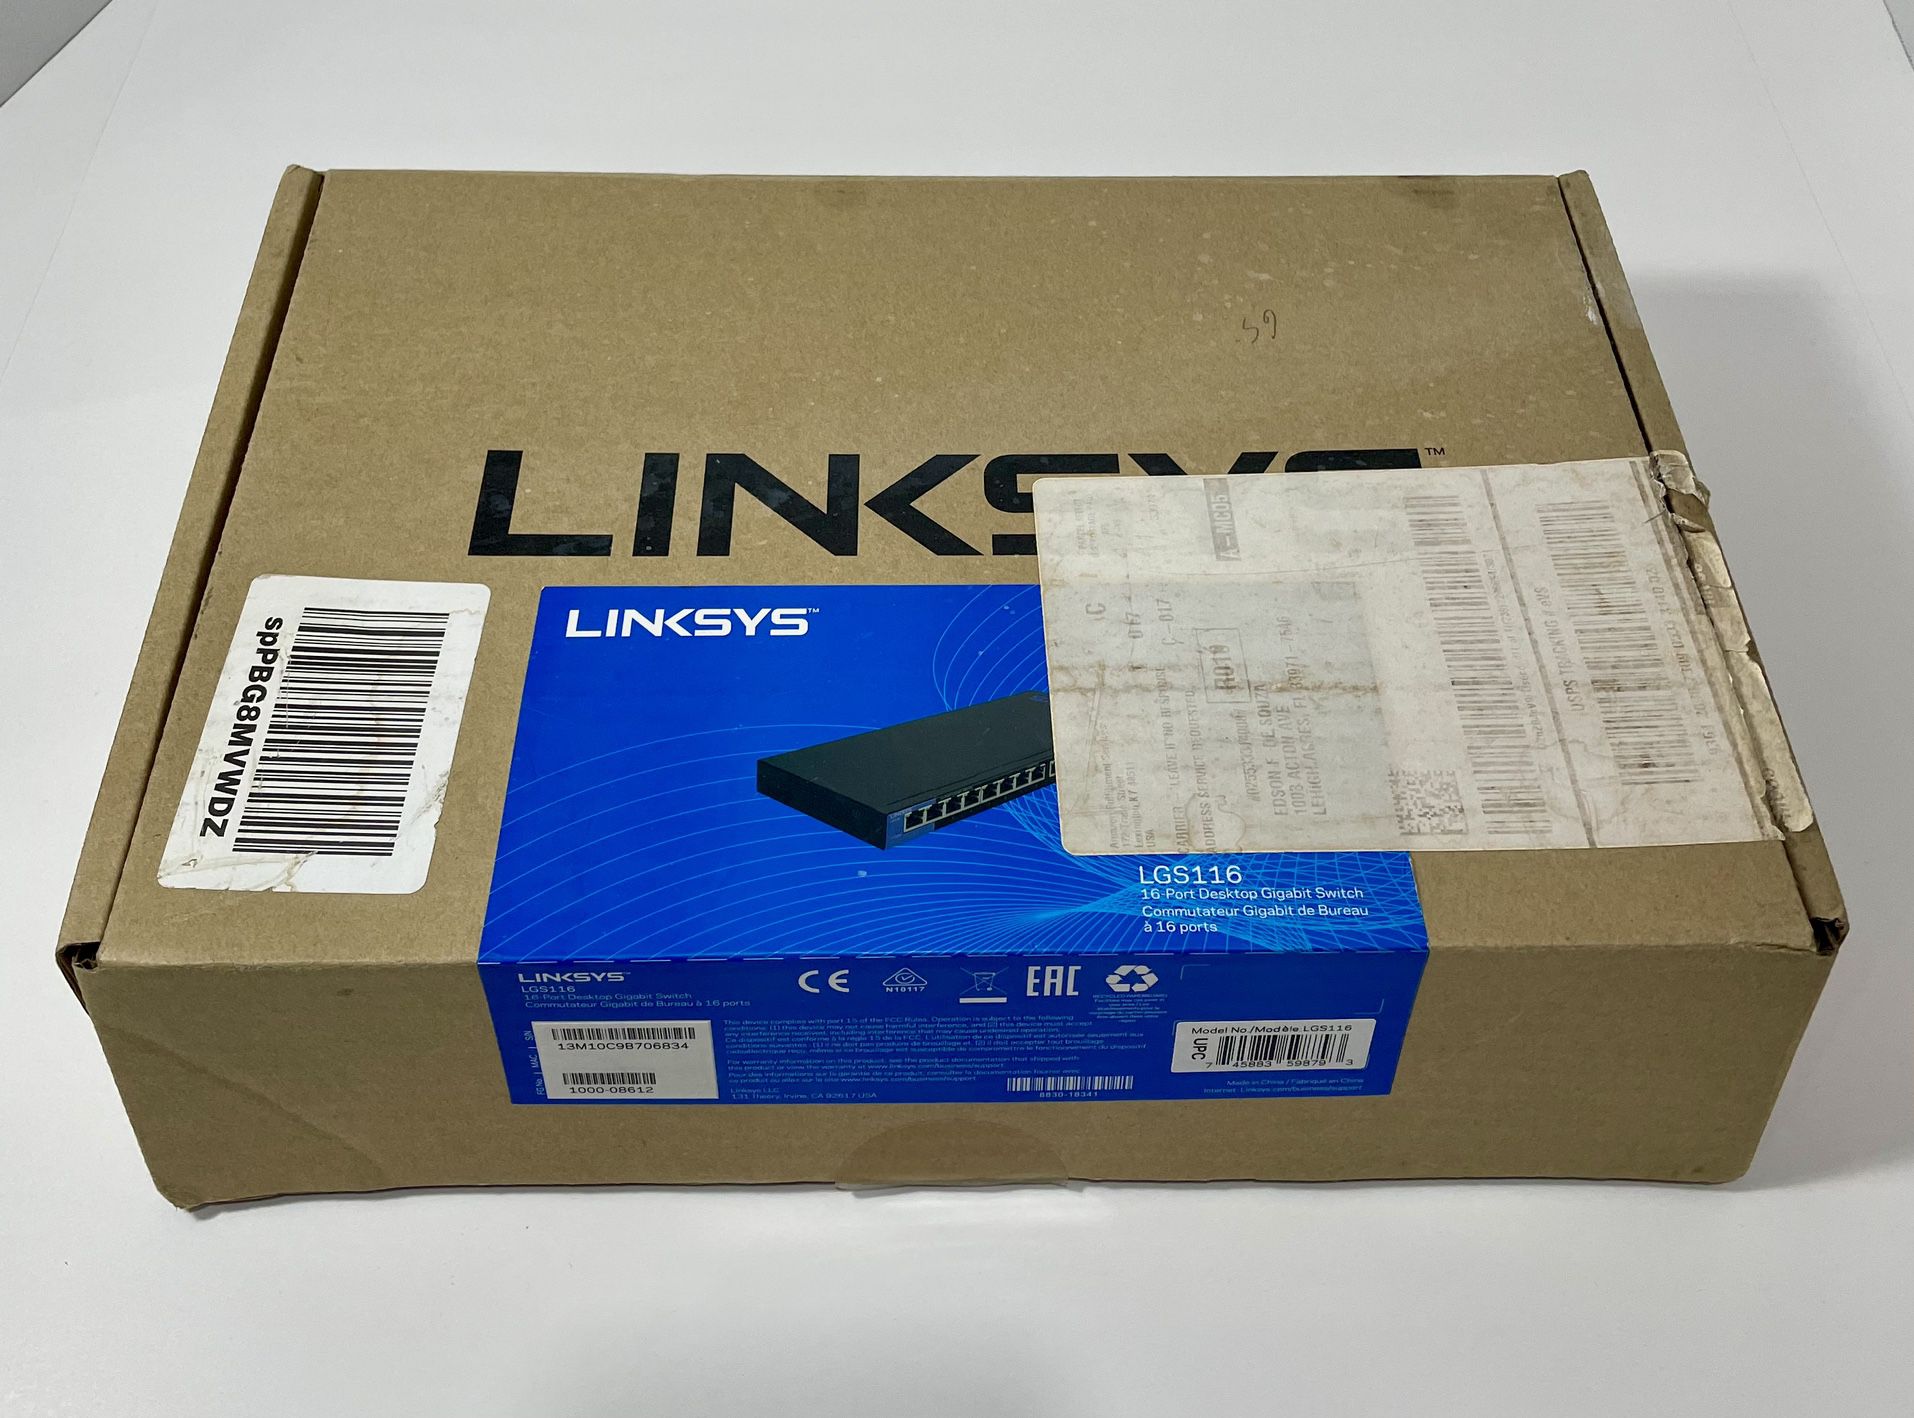 Linksys LGS116 16-Port Gigabit Switch - Great Condition, Affordable Price!